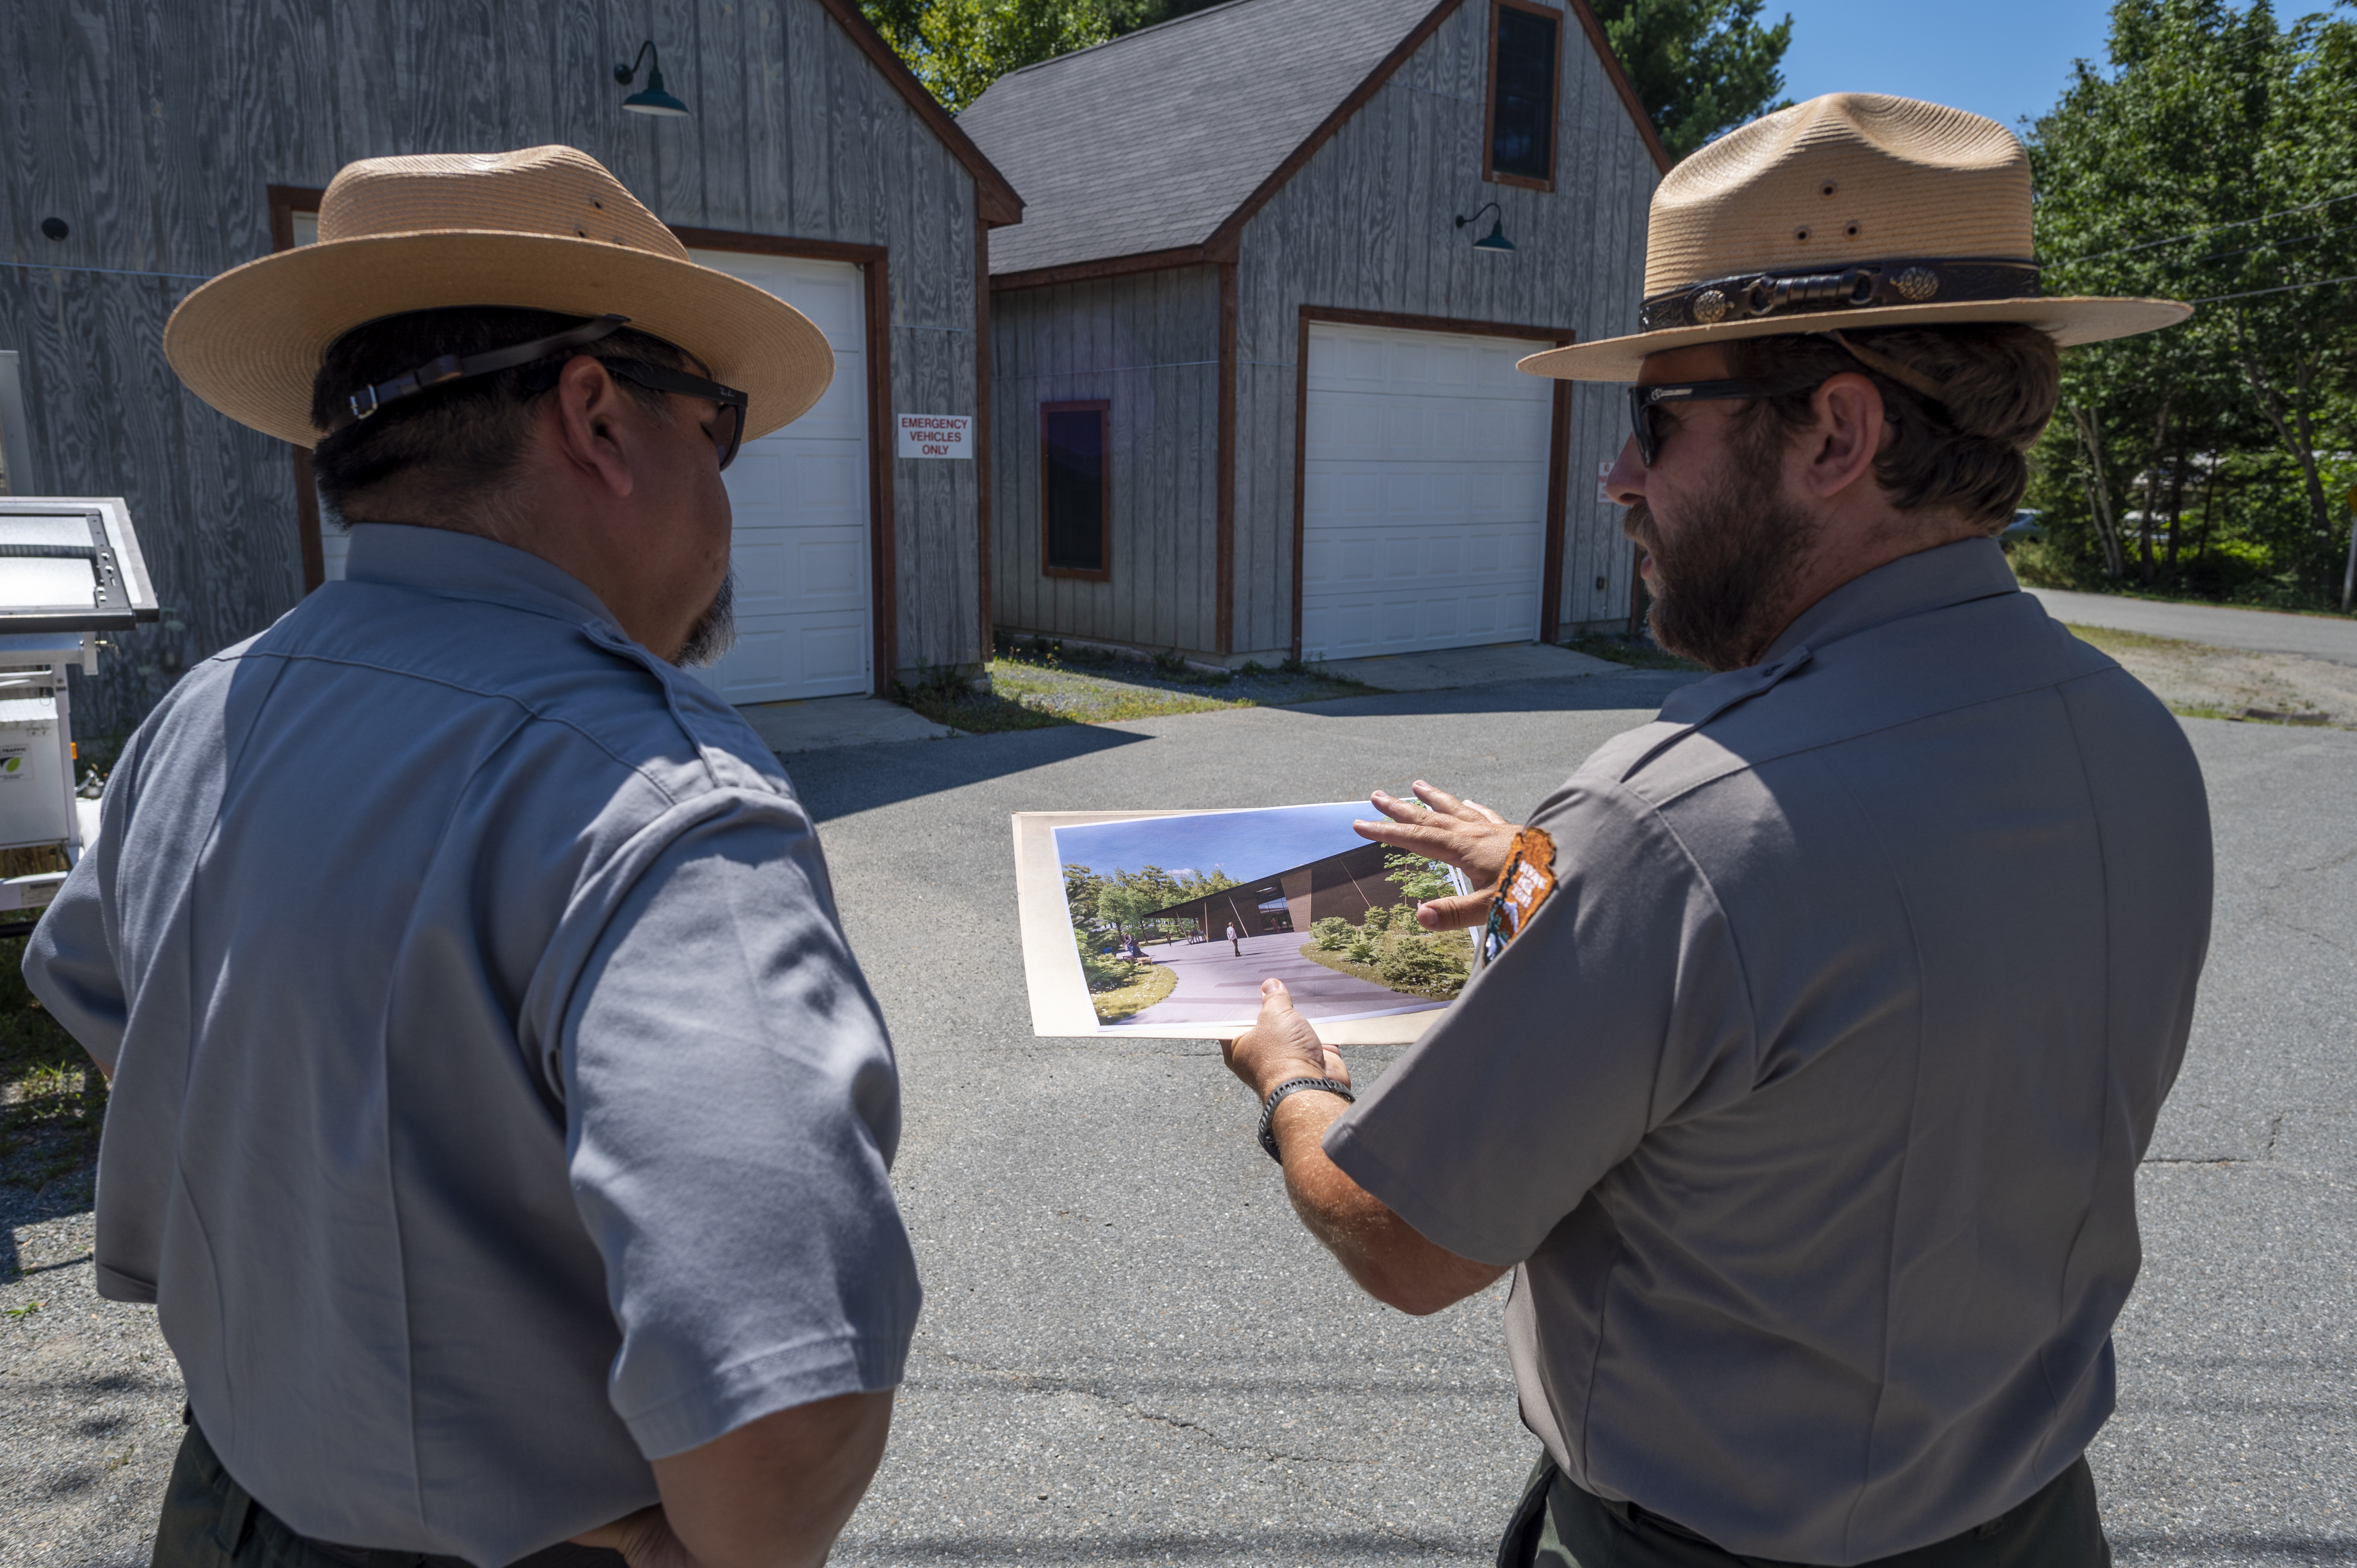 Against the backdrop of two outbuildings, two men face away, both wearing flat hats and gray uniform shirts.  The man on the right is holding an image of a different building.